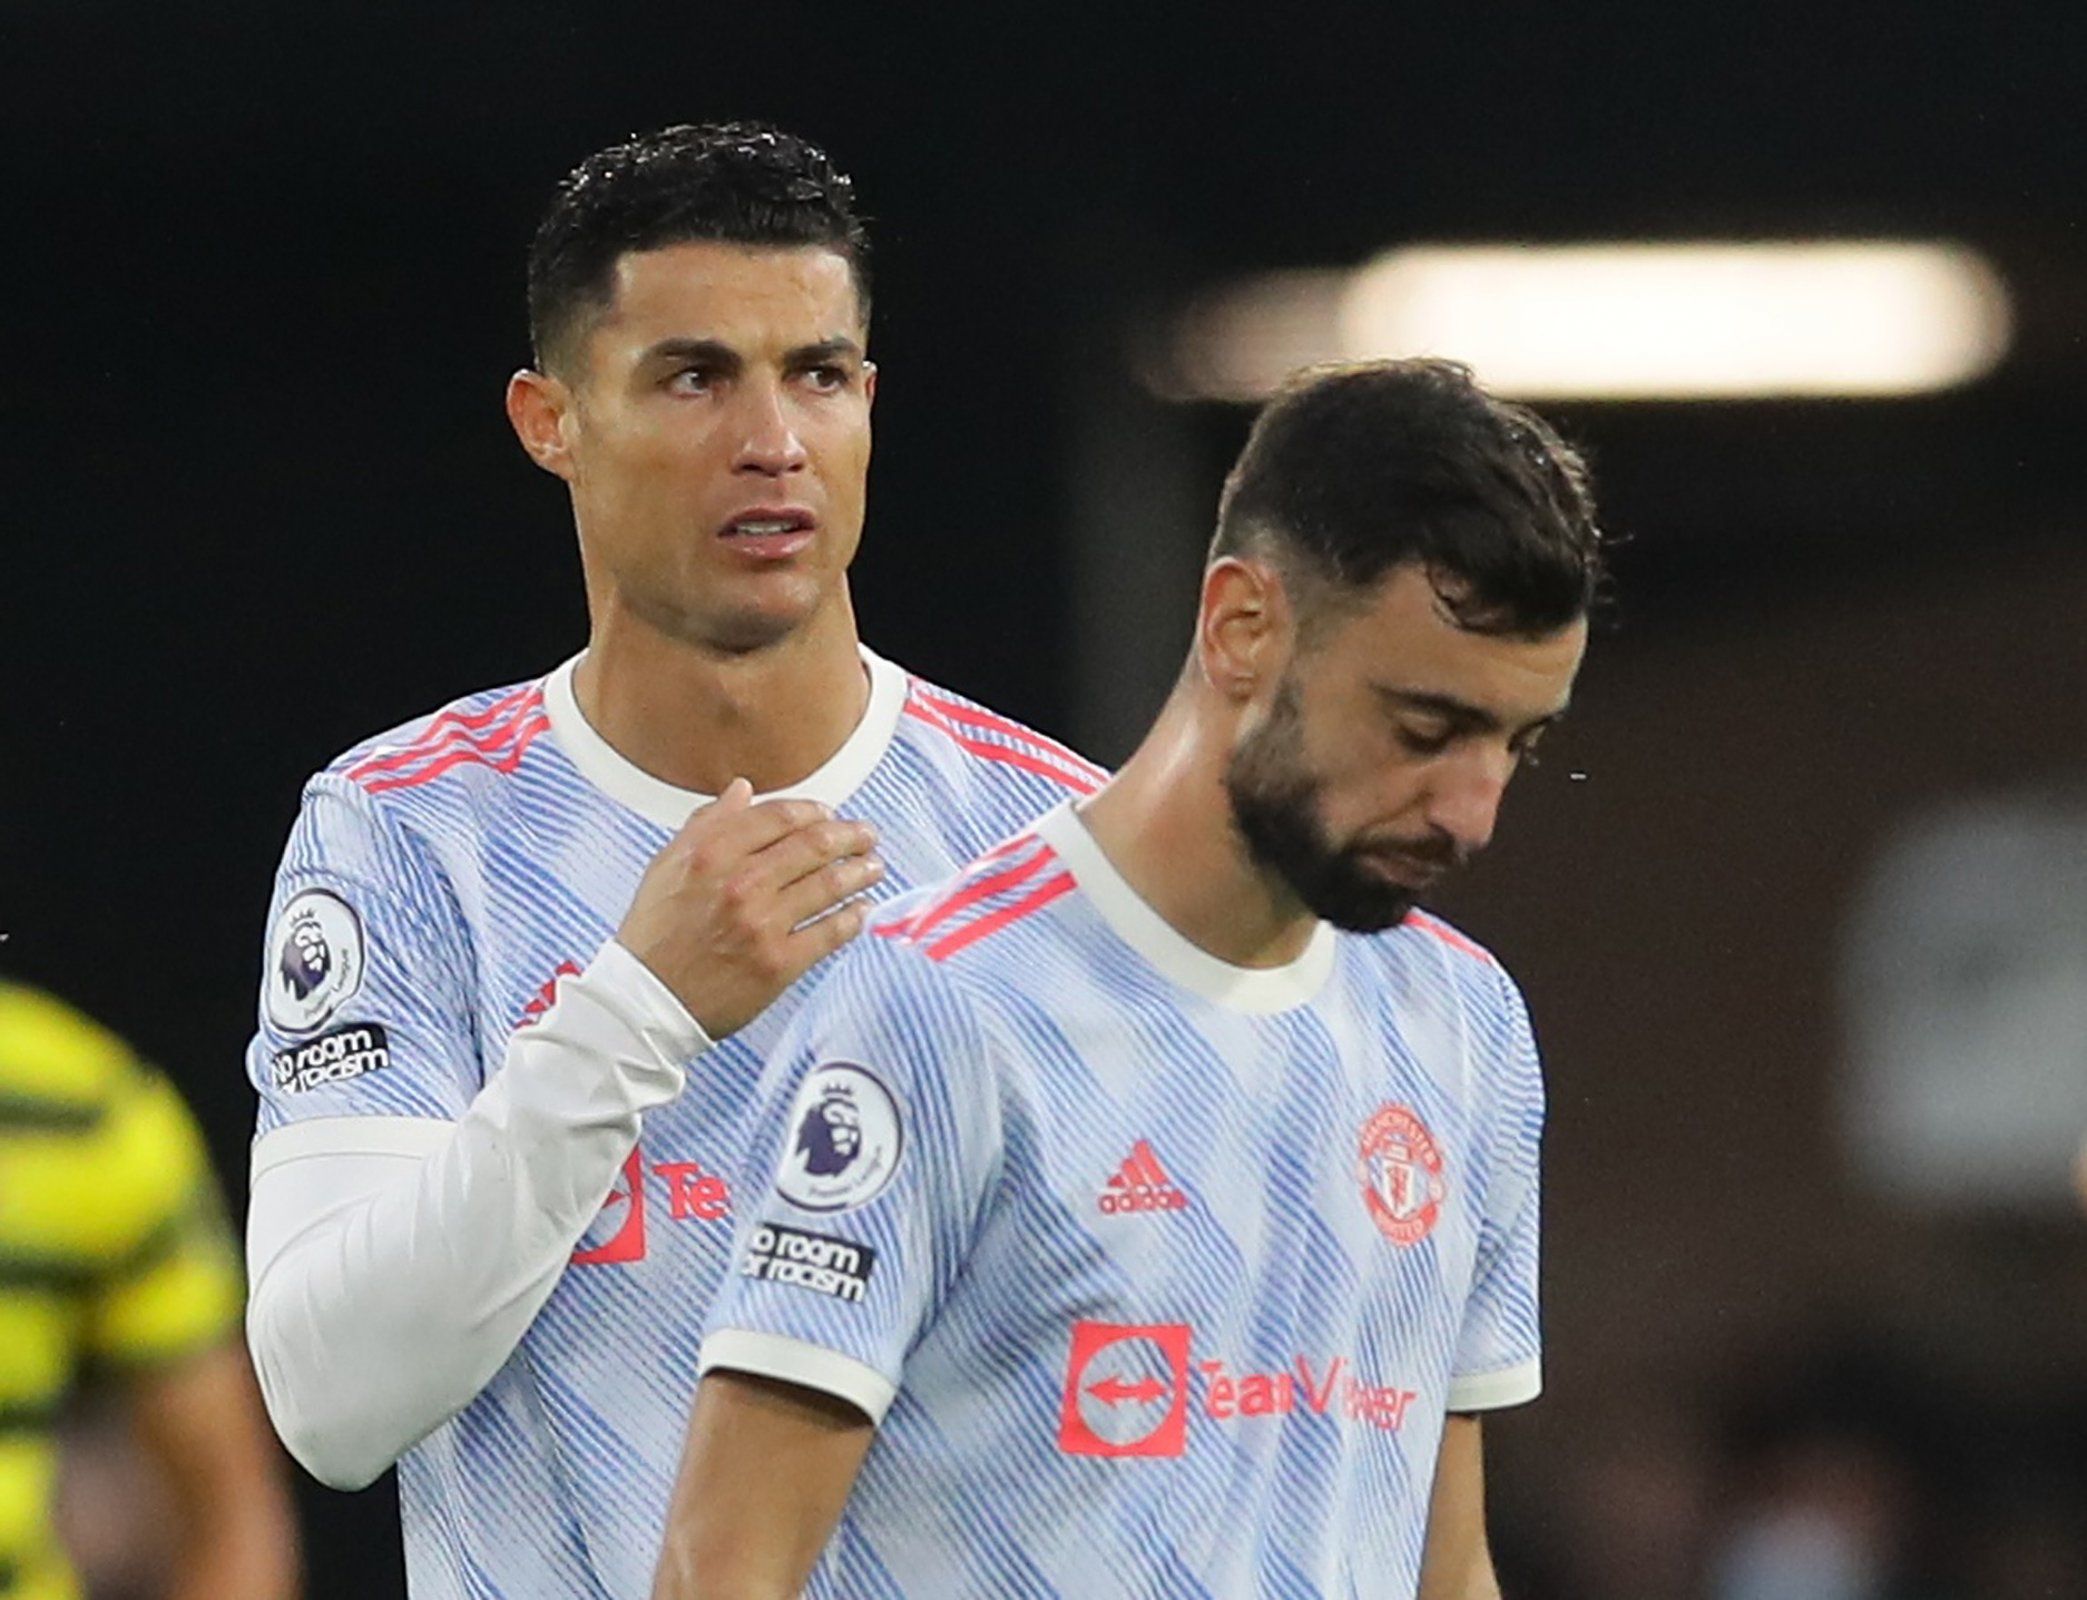 Manchester United players Cristiano Ronaldo and Bruno Fernandes